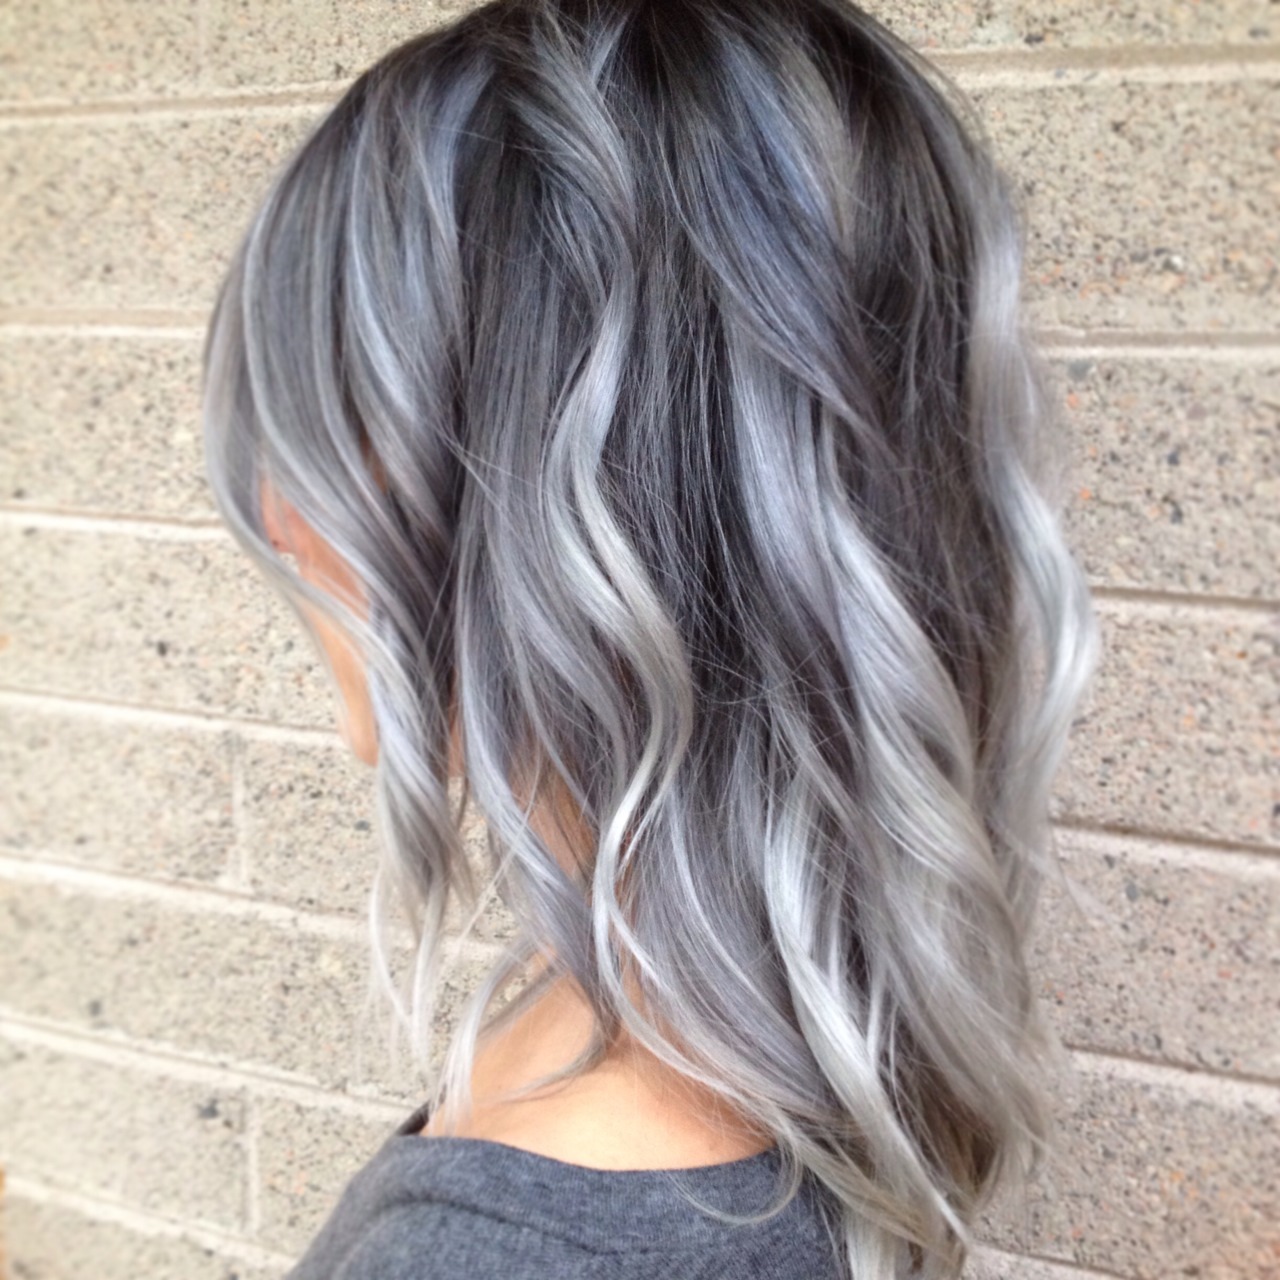 Young women with gray hair trend